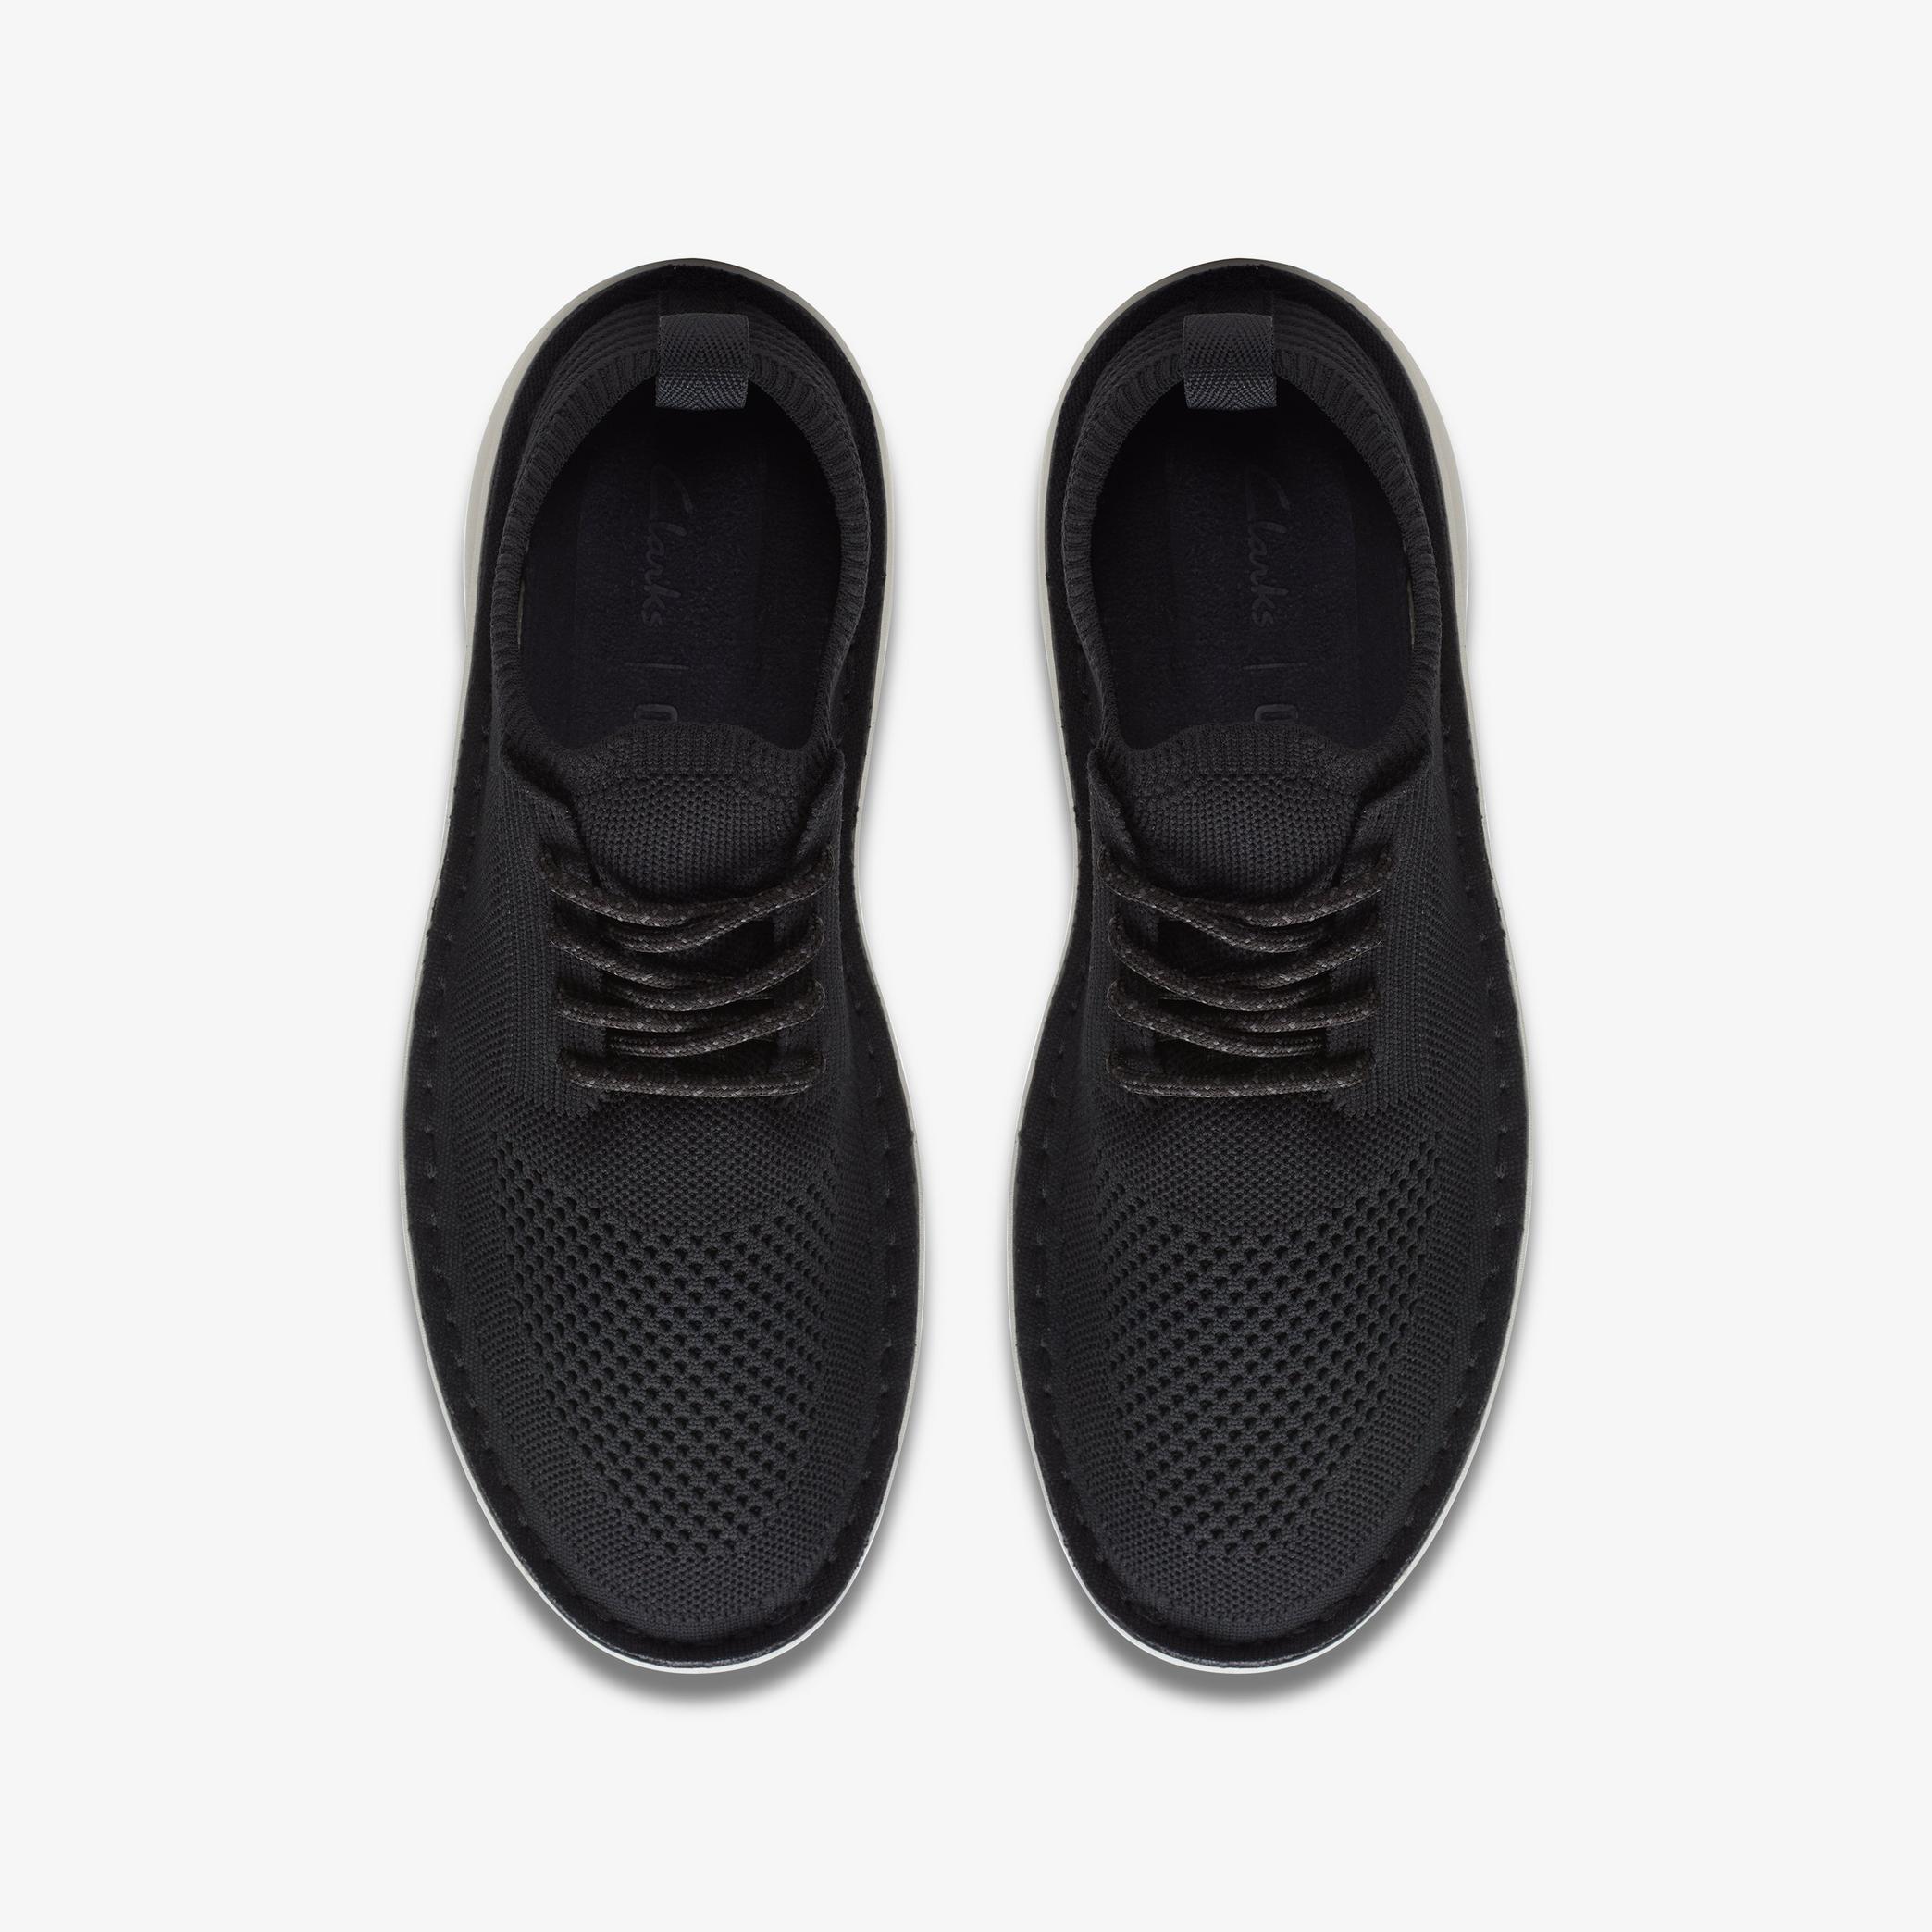 Clarks Origin2 Black Knit Trainers, view 6 of 6